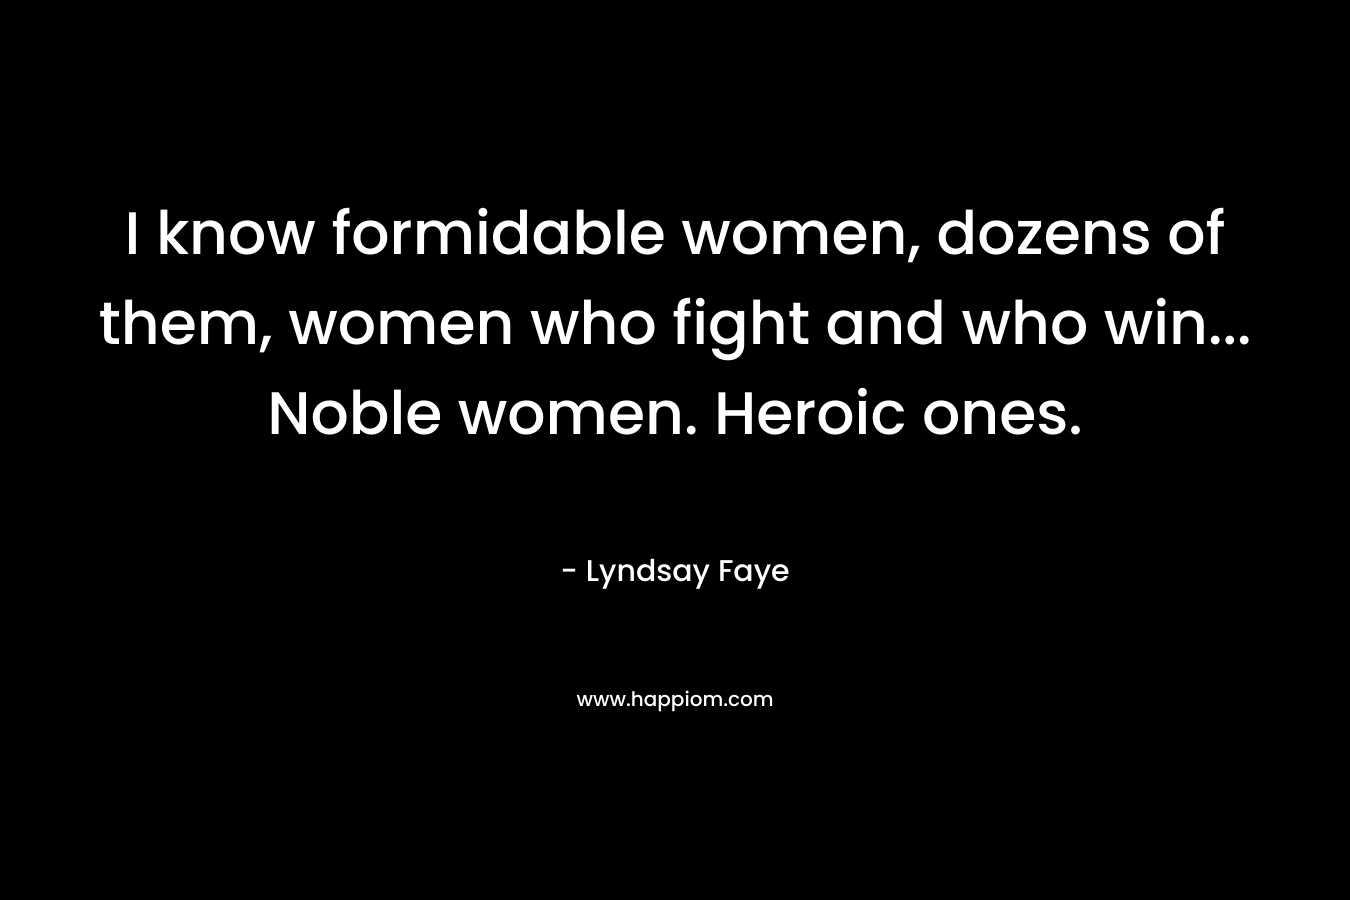 I know formidable women, dozens of them, women who fight and who win… Noble women. Heroic ones. – Lyndsay Faye